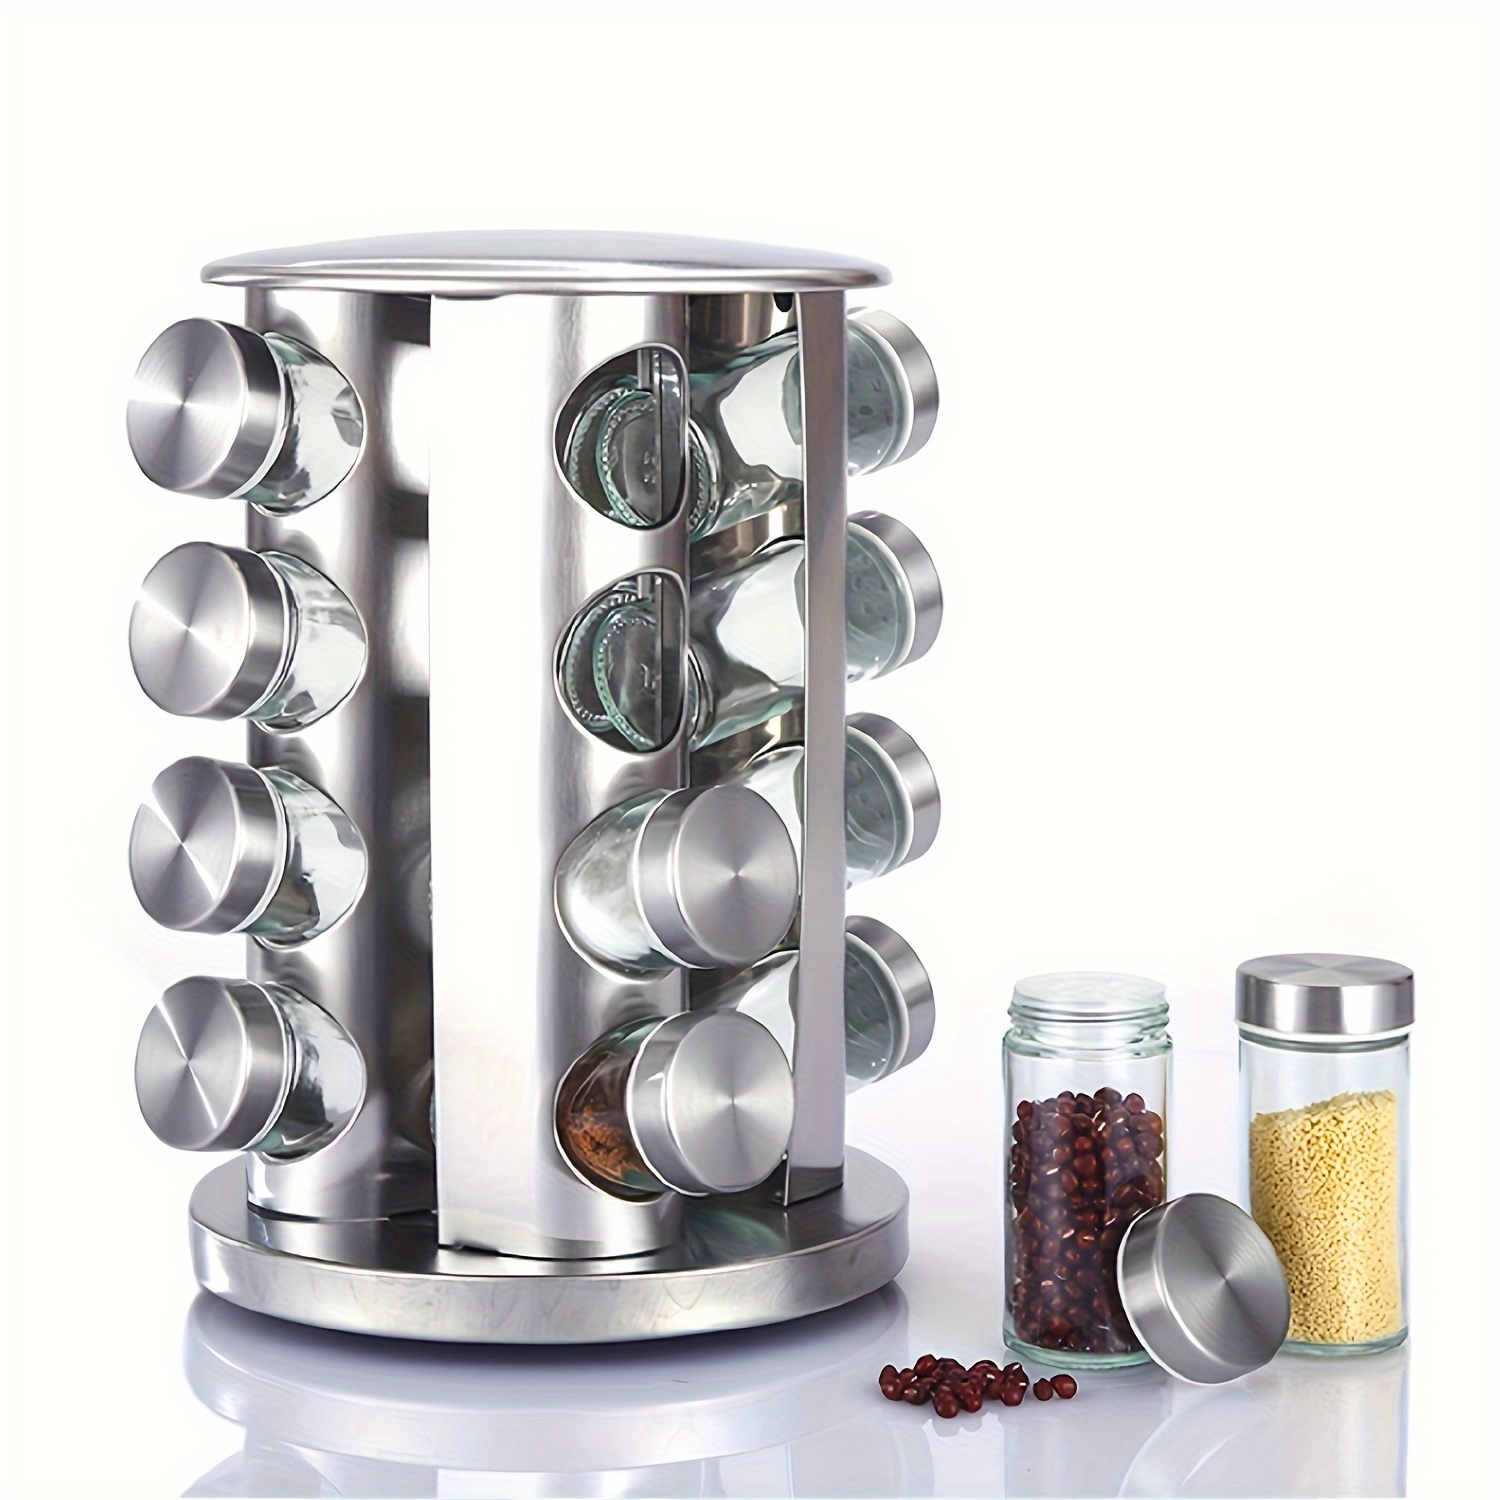 

1pc, Stainless Steel Rotating Spice Rack Organizer With 12 Jars, Rust-resistant Seasoning Holder For Kitchen Cabinets, Kitchen Tools